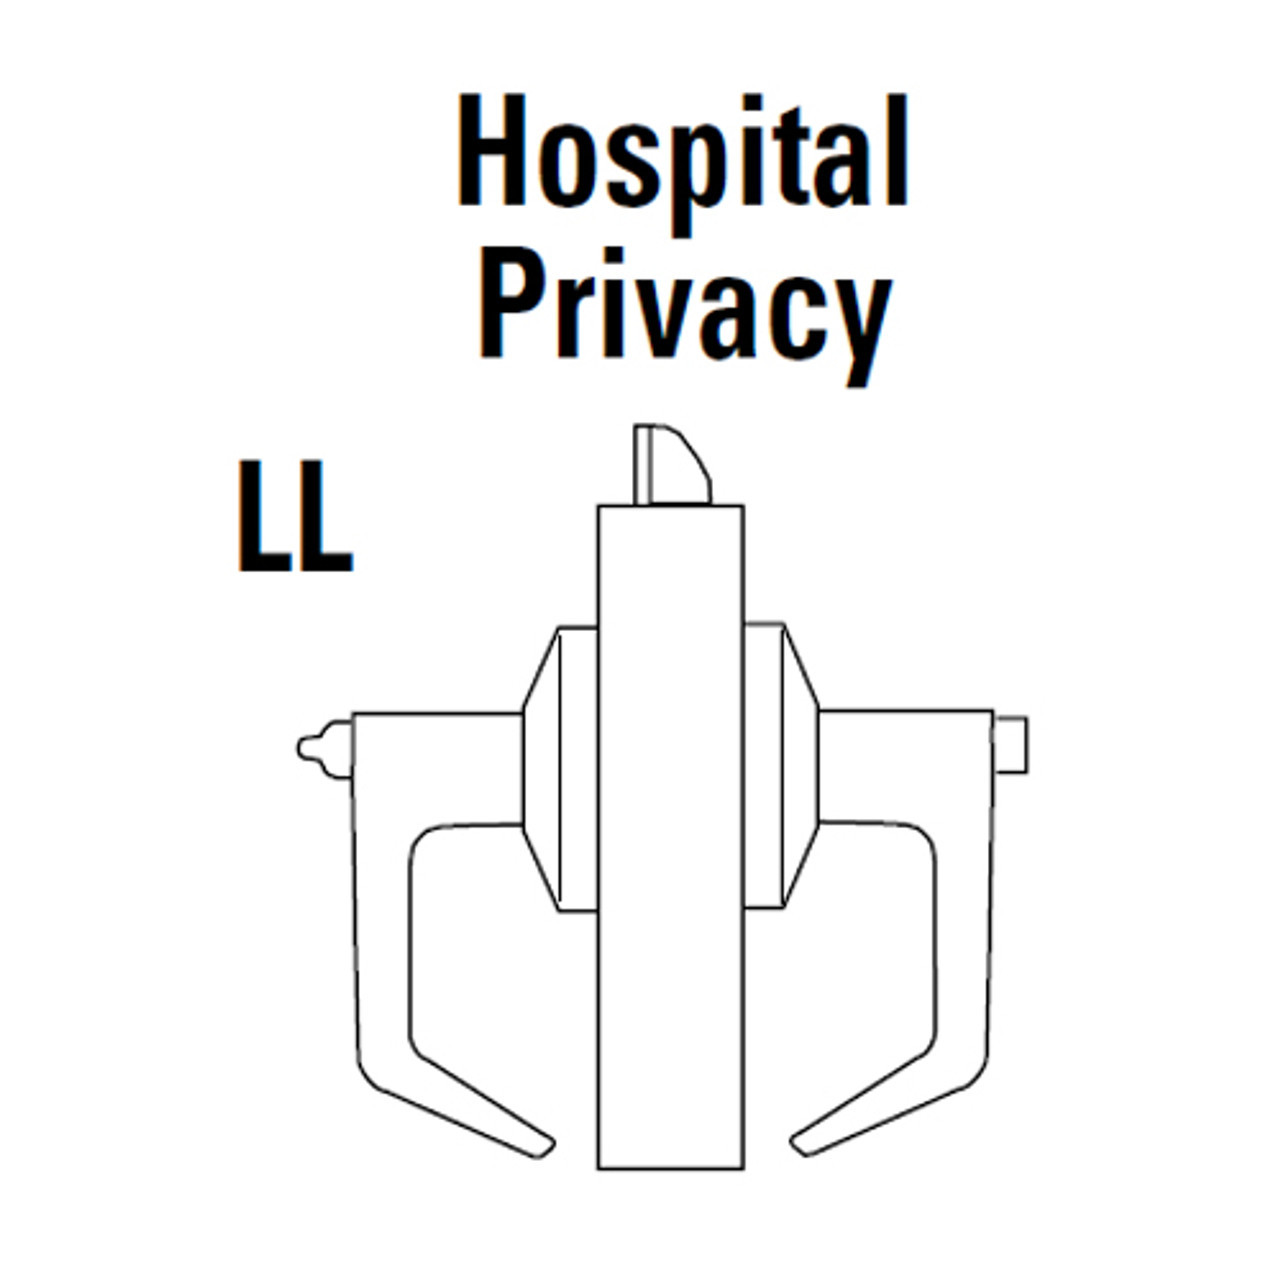 9K30LL14CSTK611LM Best 9K Series Hospital Privacy Heavy Duty Cylindrical Lever Locks in Bright Bronze